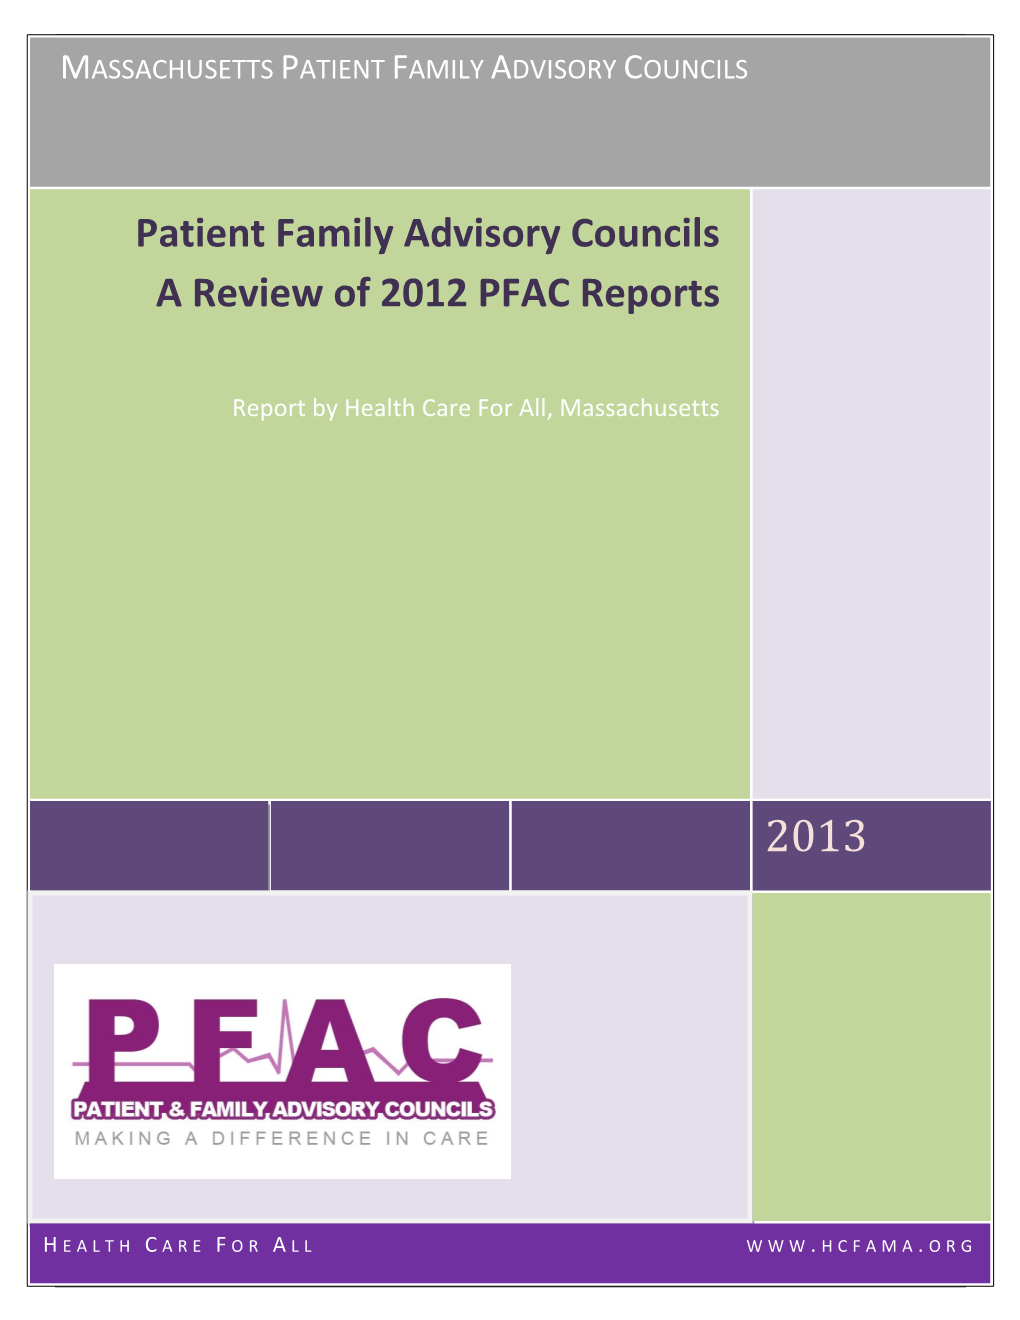 Patient Family Advisory Councils a Review of 2012 PFAC Reports